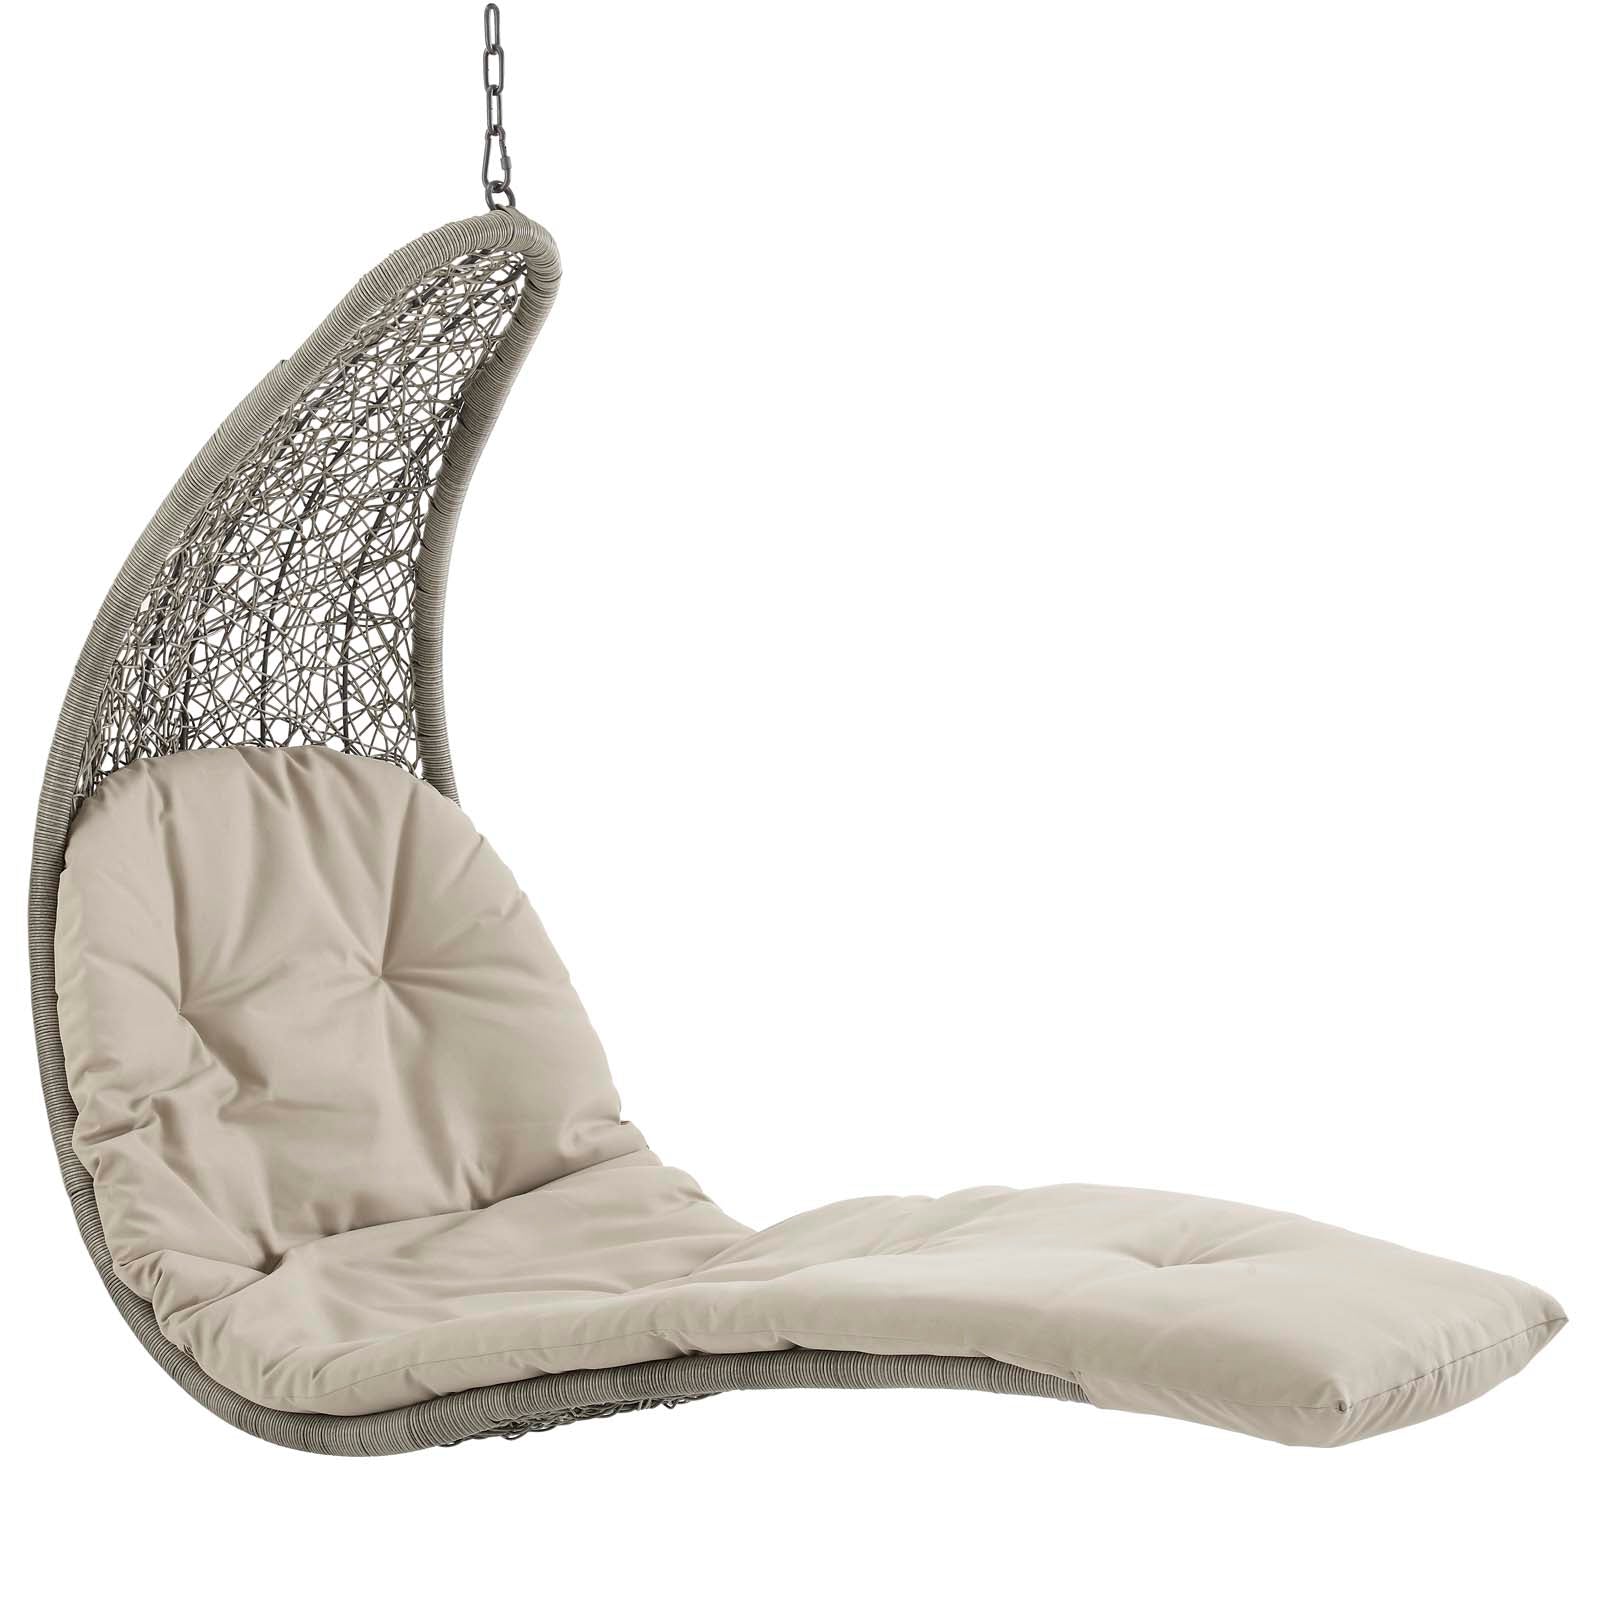 Landscape Hanging Chaise Lounge Outdoor Patio Swing Chair - East Shore Modern Home Furnishings